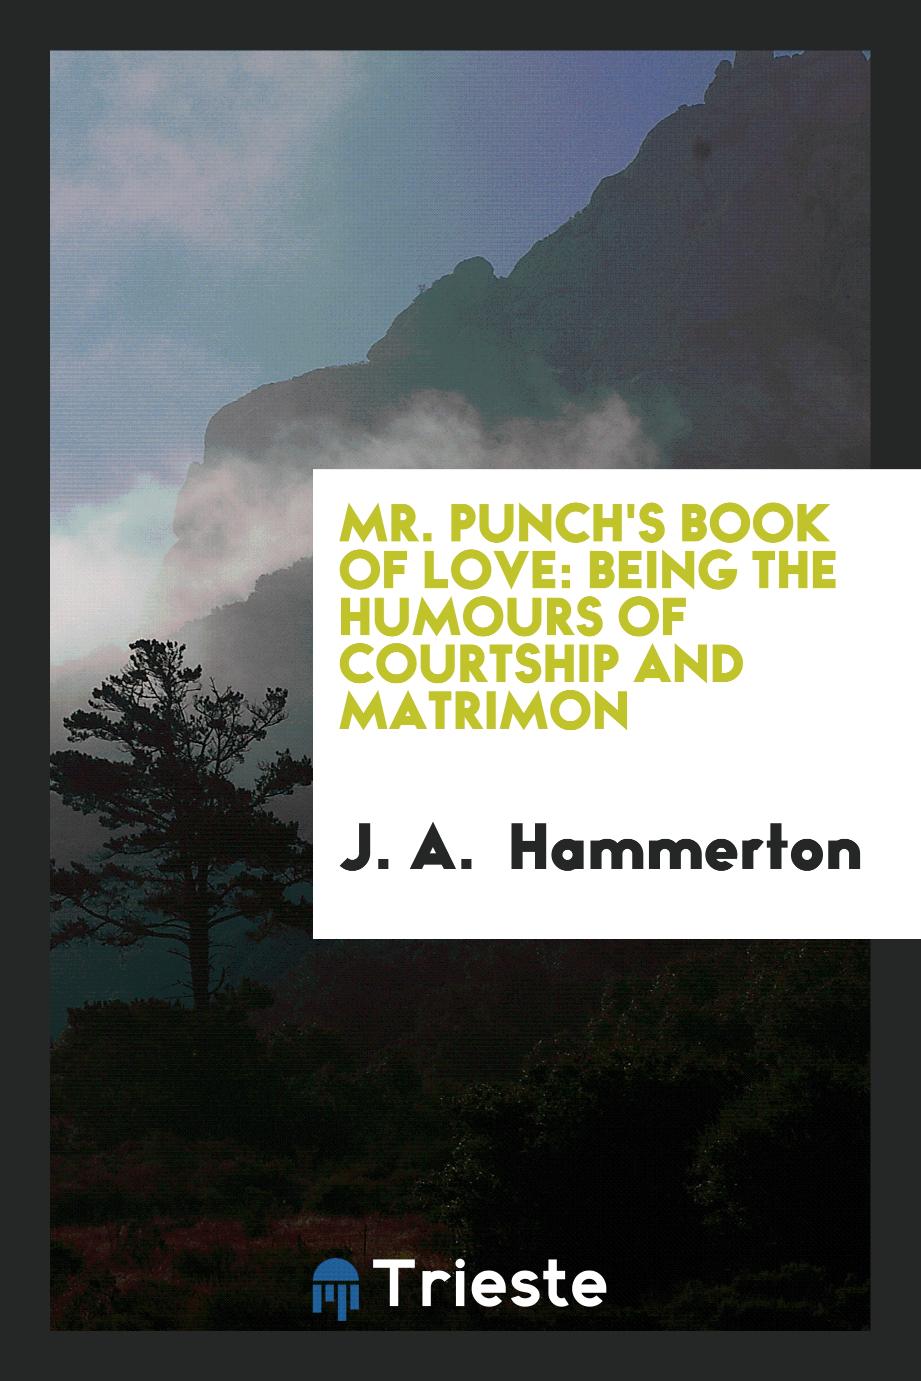 Mr. Punch's book of love: being the humours of courtship and matrimon